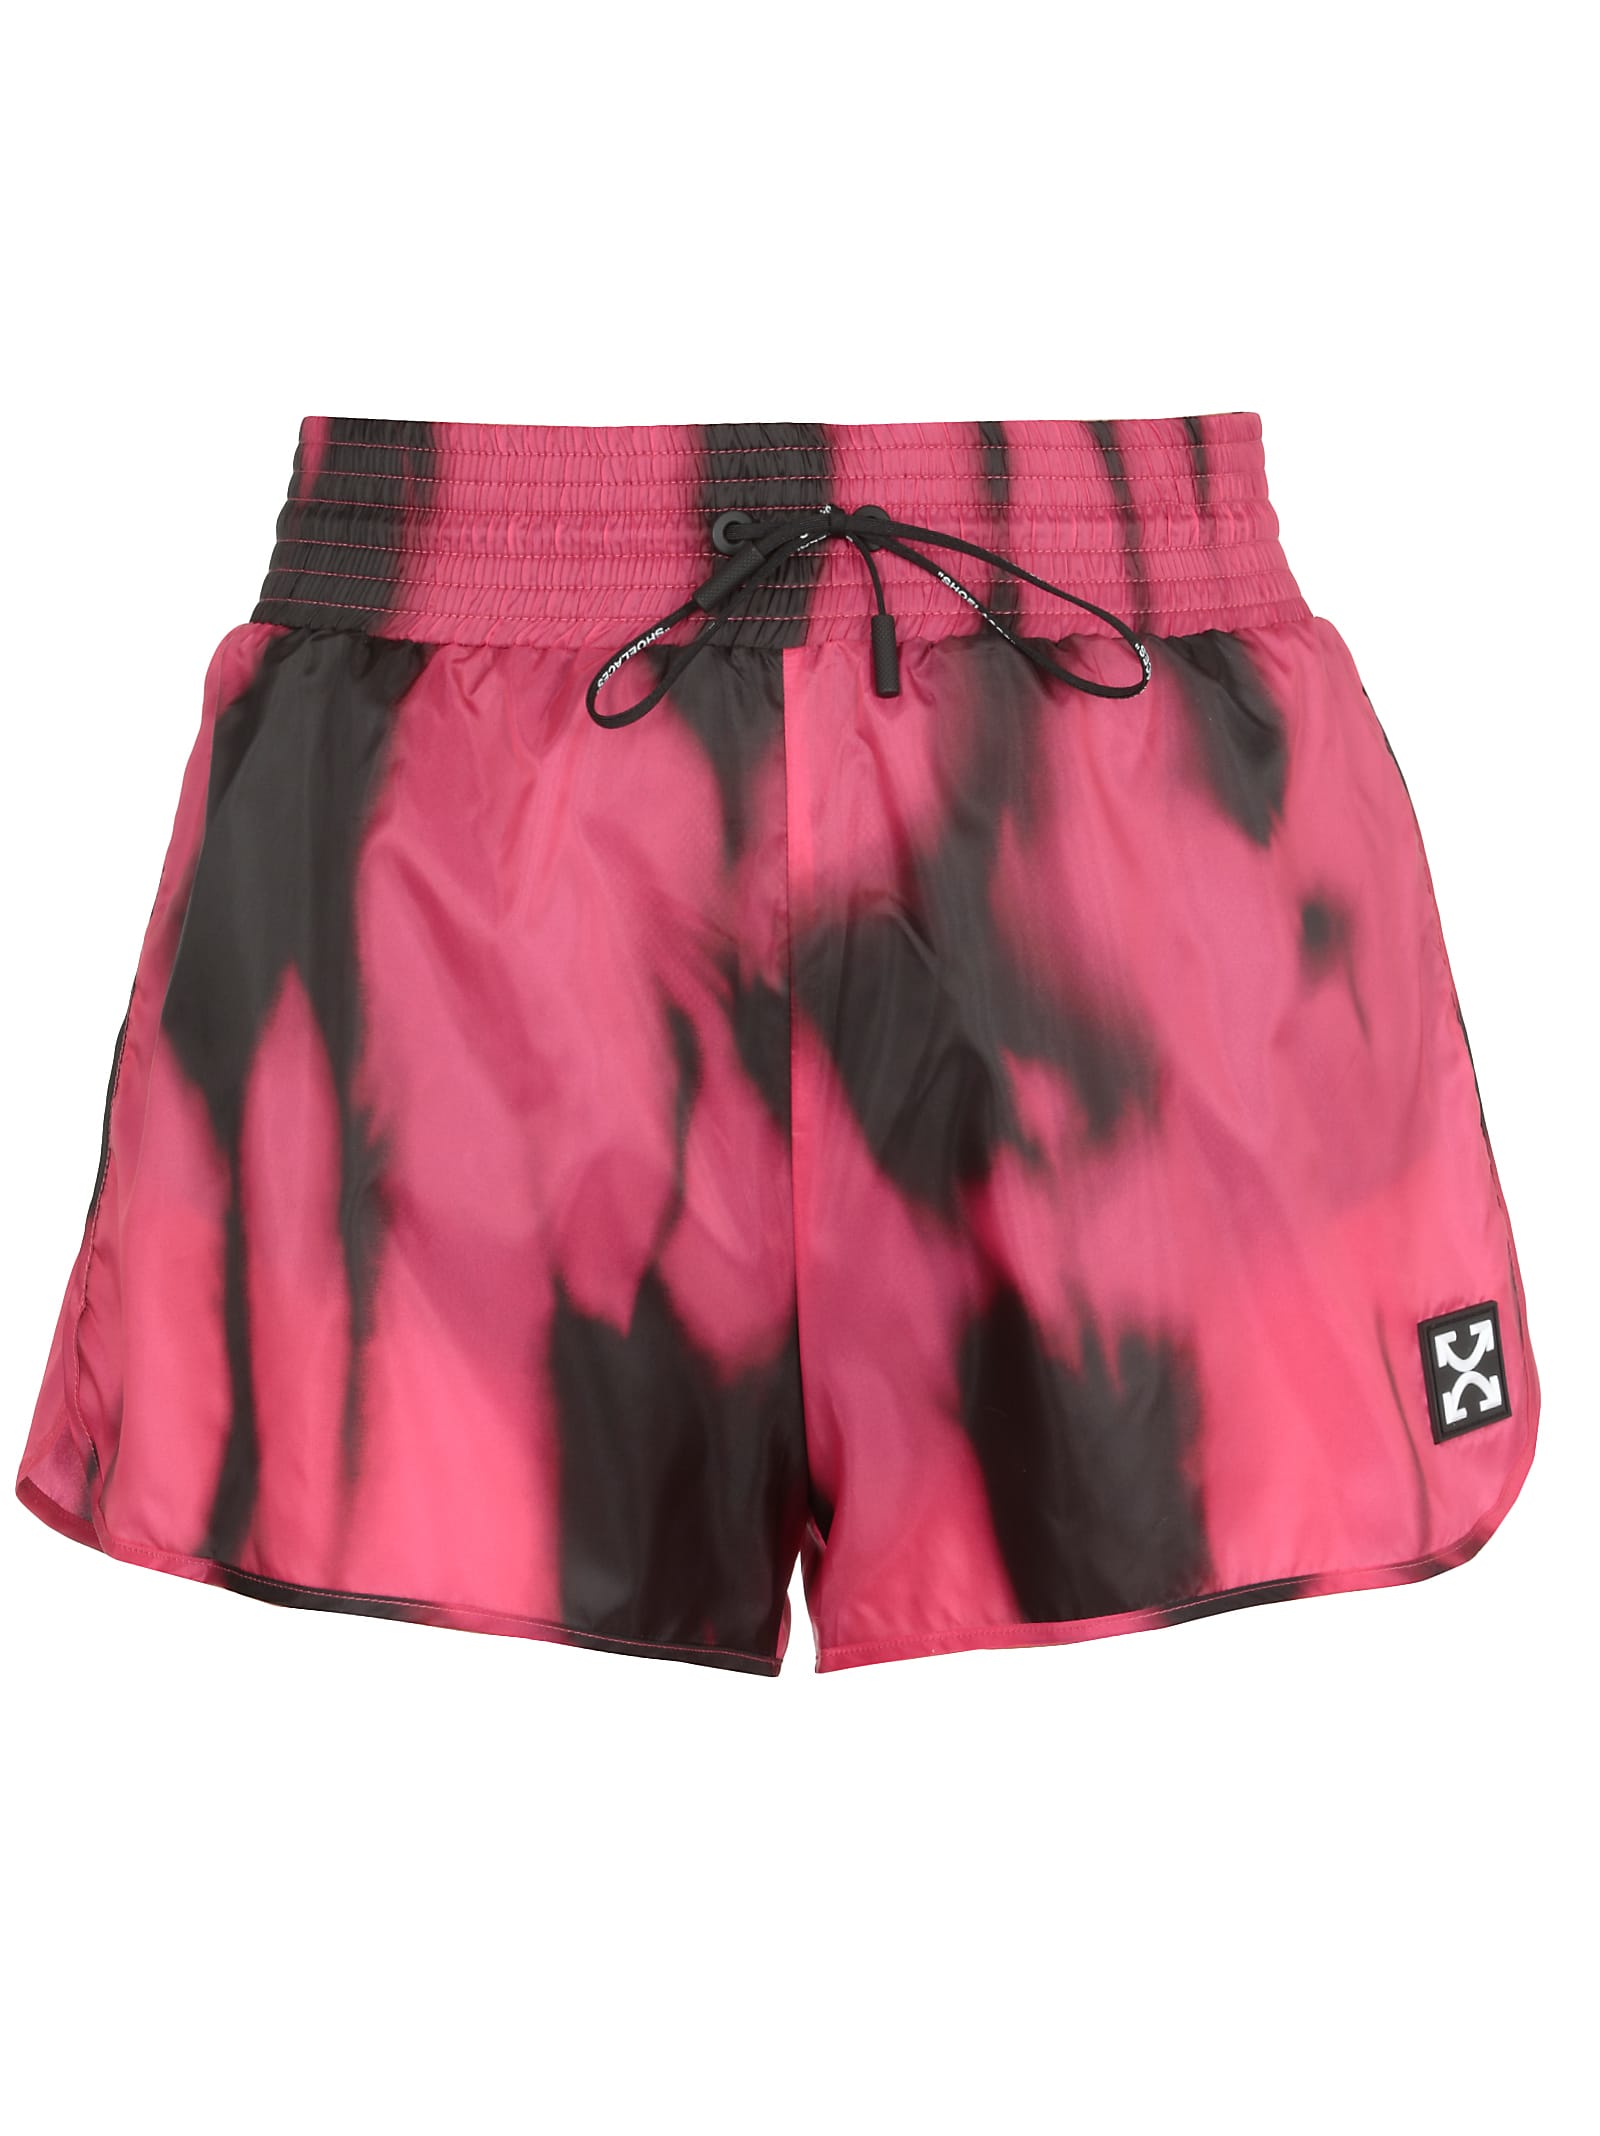 OFF-WHITE ACTIVE TIGER DYE SHORTS,11270147